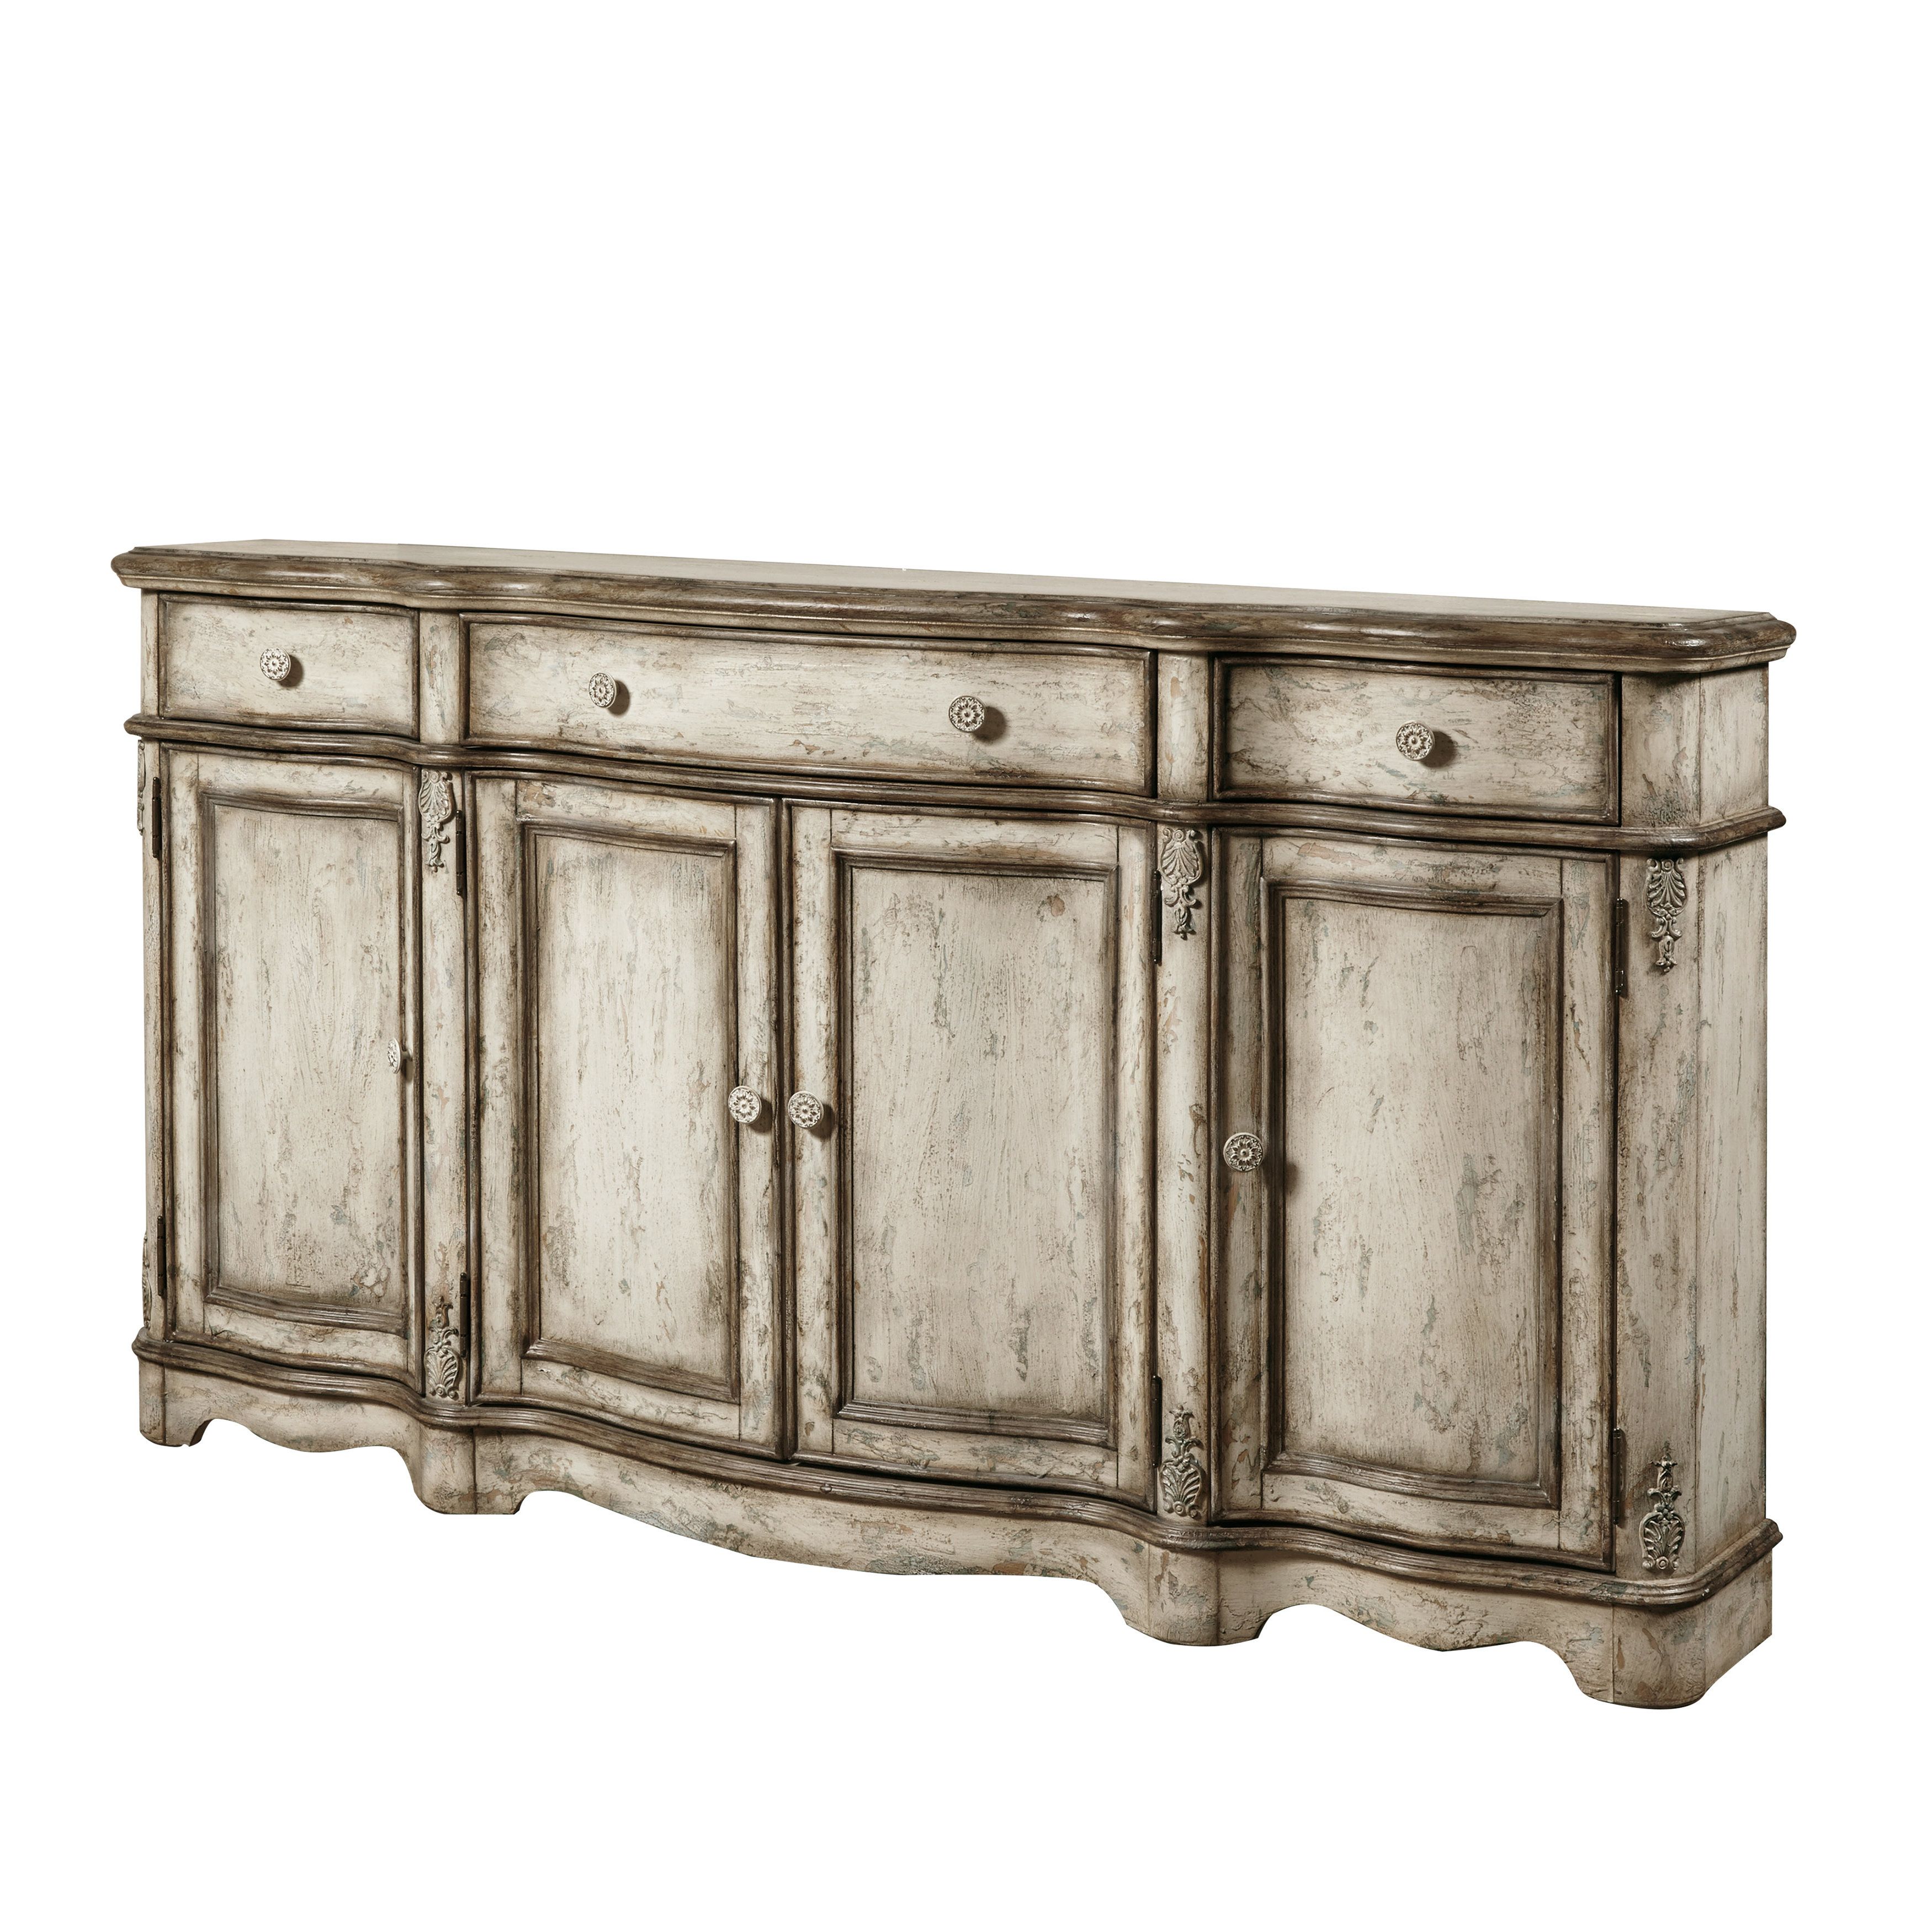 Farmhouse & Rustic Distressed Finish Sideboards & Buffets Intended For Most Popular Seiling Sideboards (View 19 of 20)